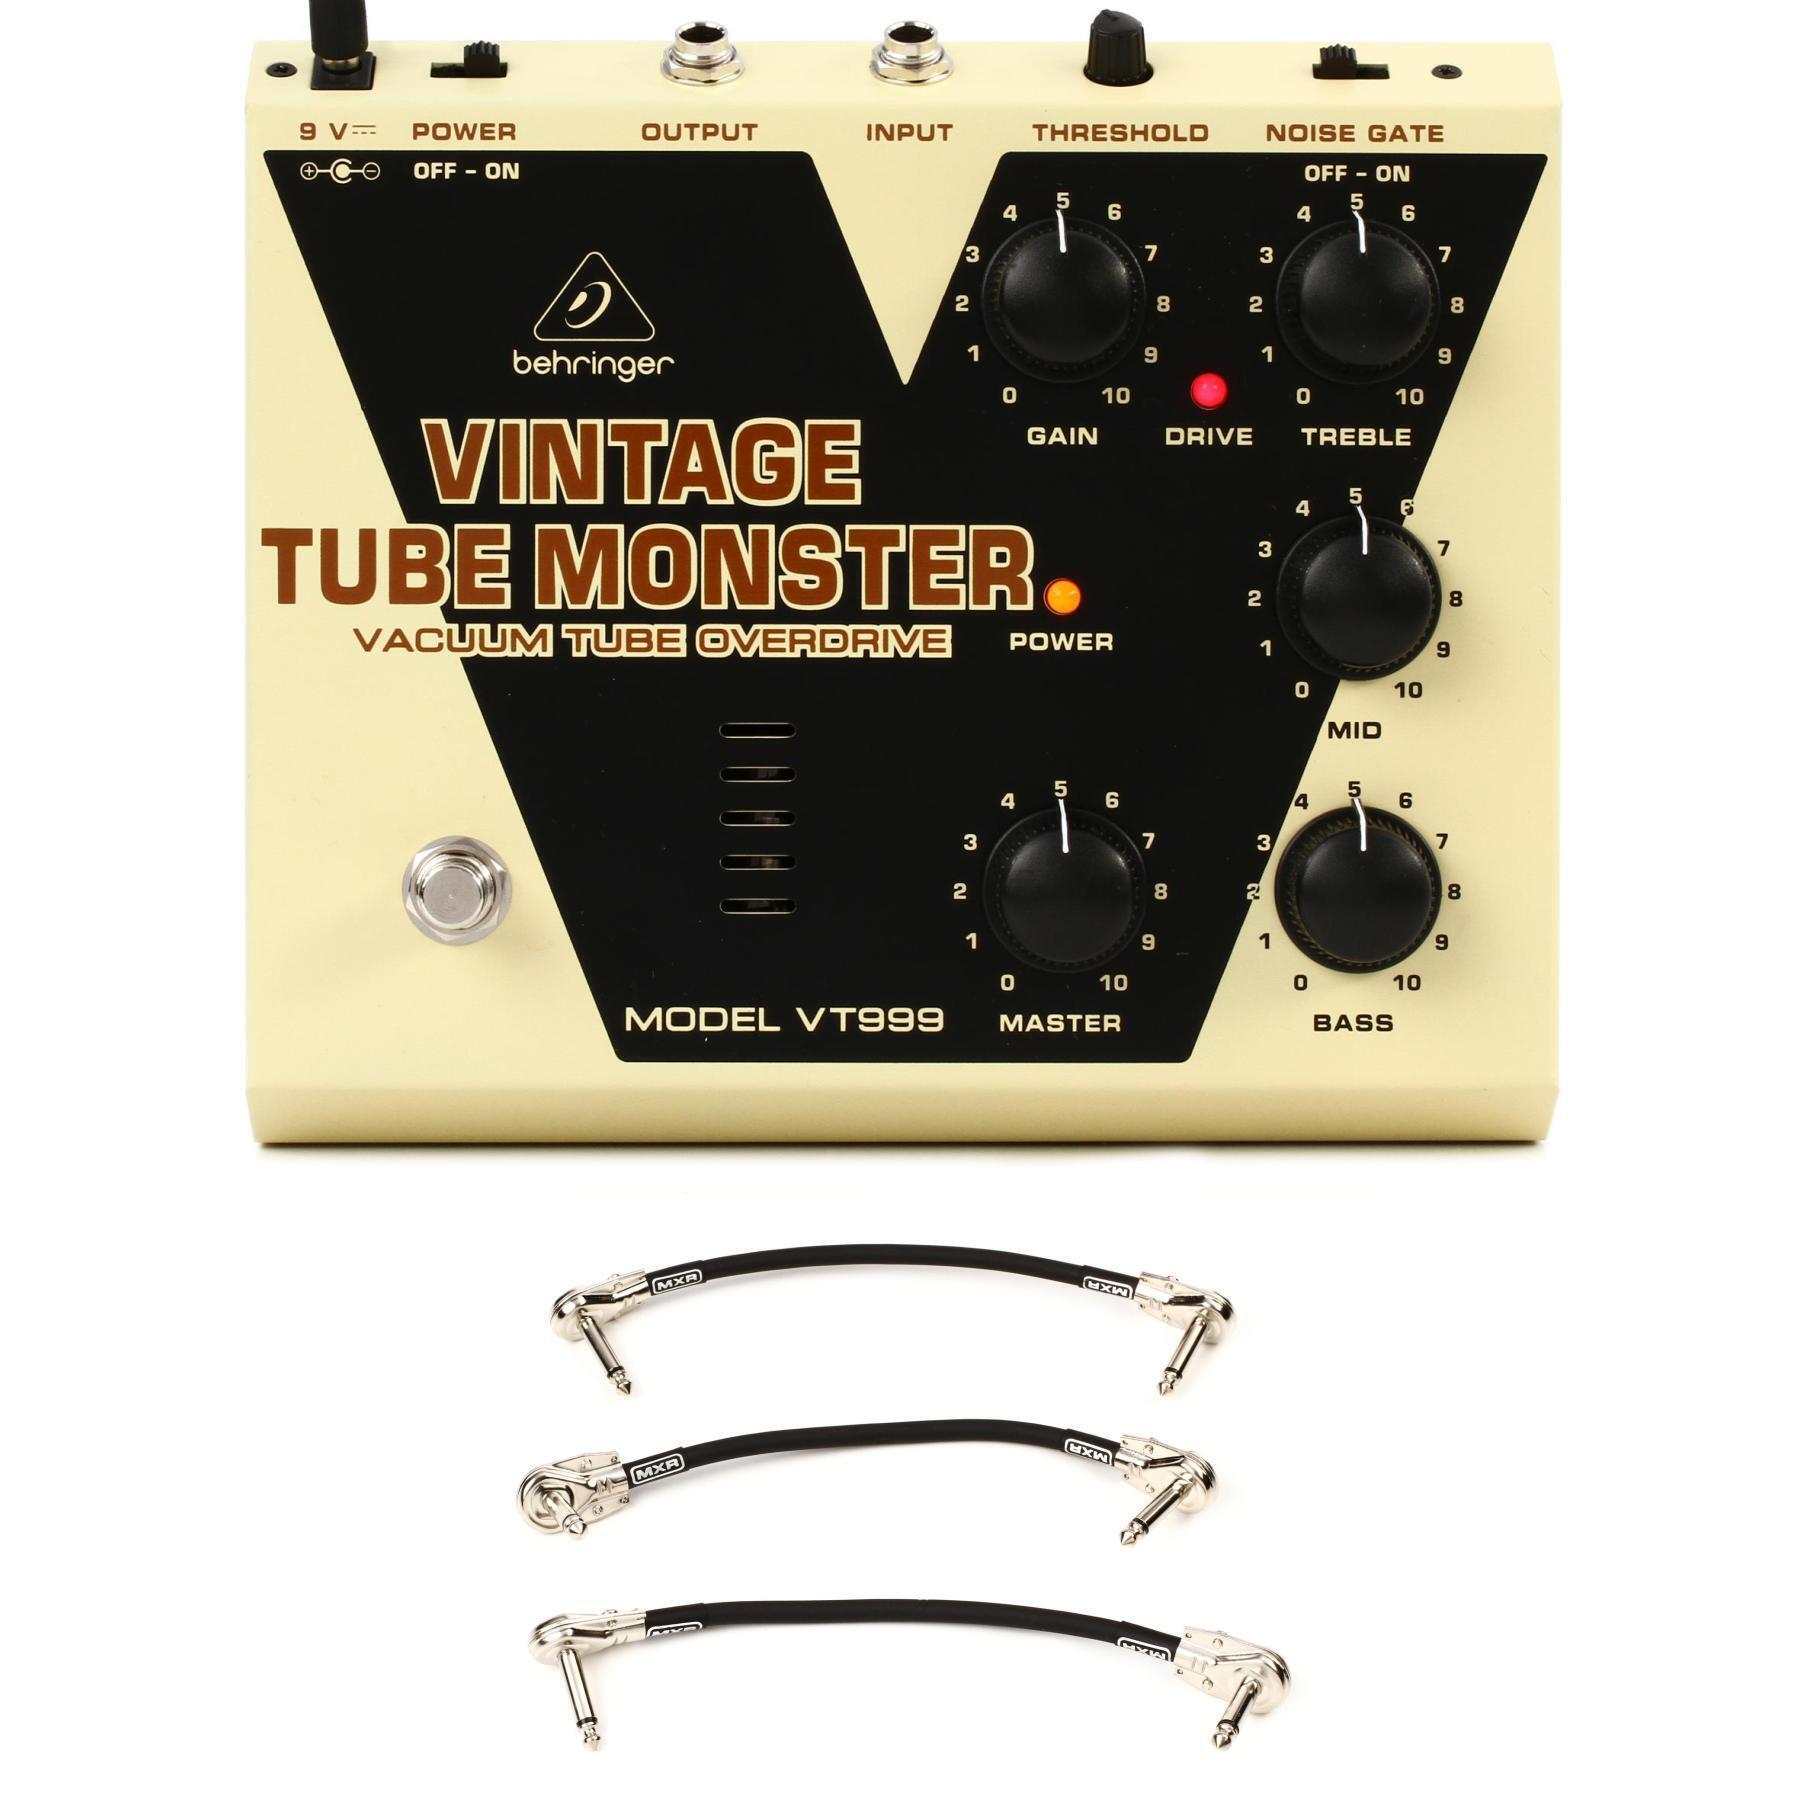 Behringer VT999 Vintage Tube Monster Overdrive Pedal with 3 Patch Cables